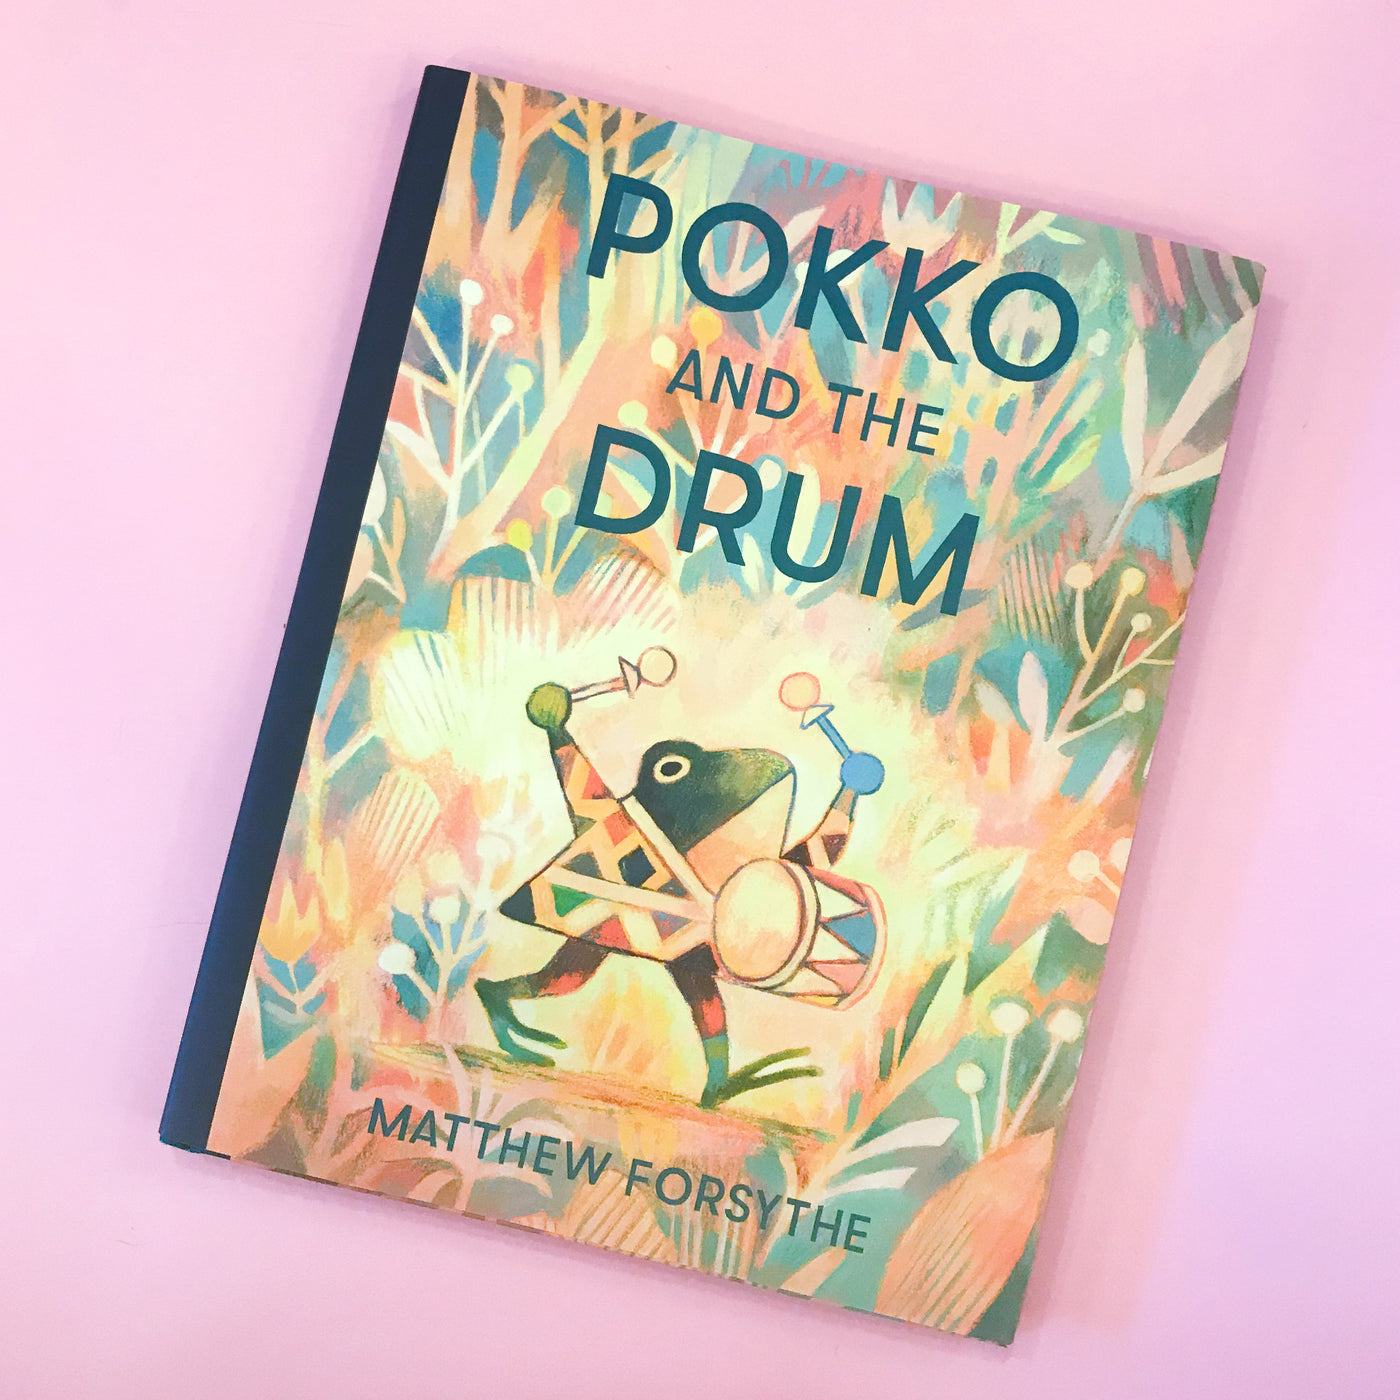 Pokko And The Drum by Matthew Forsthye